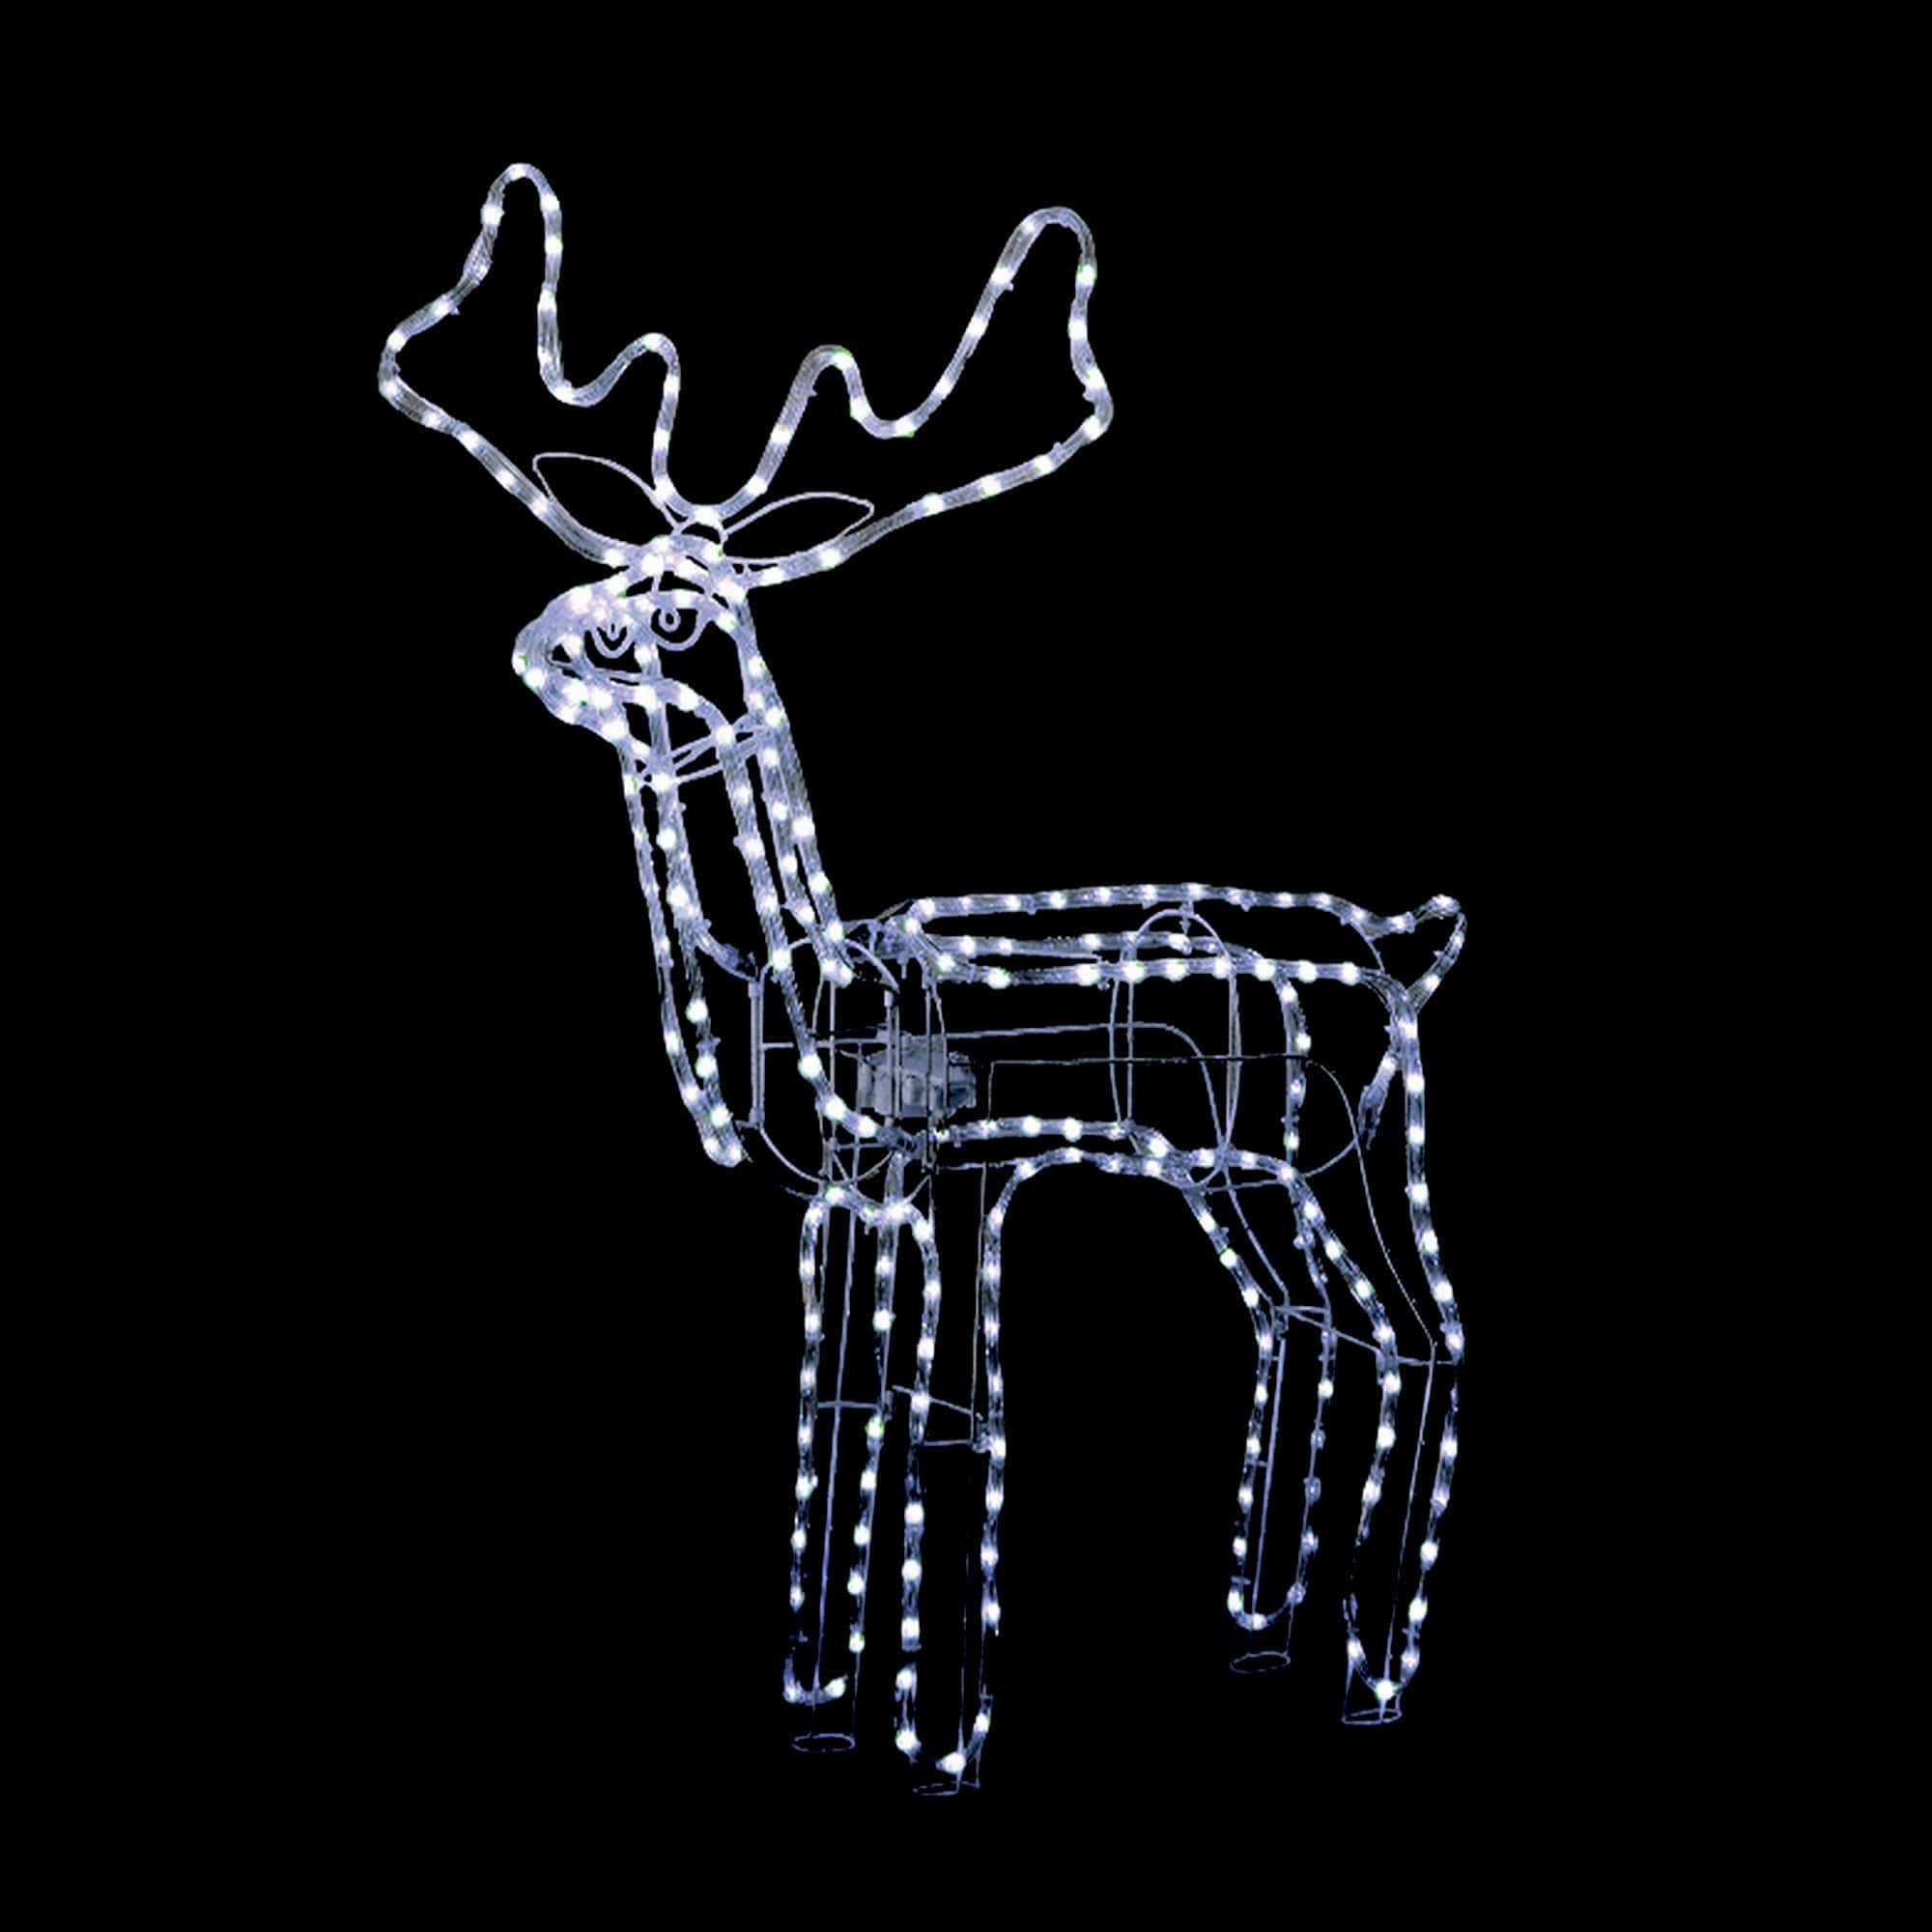 Promo Christmas Figure White 3D Illuminated LED Reindeer with Motor | Three Colour Options LL0013R007W-P